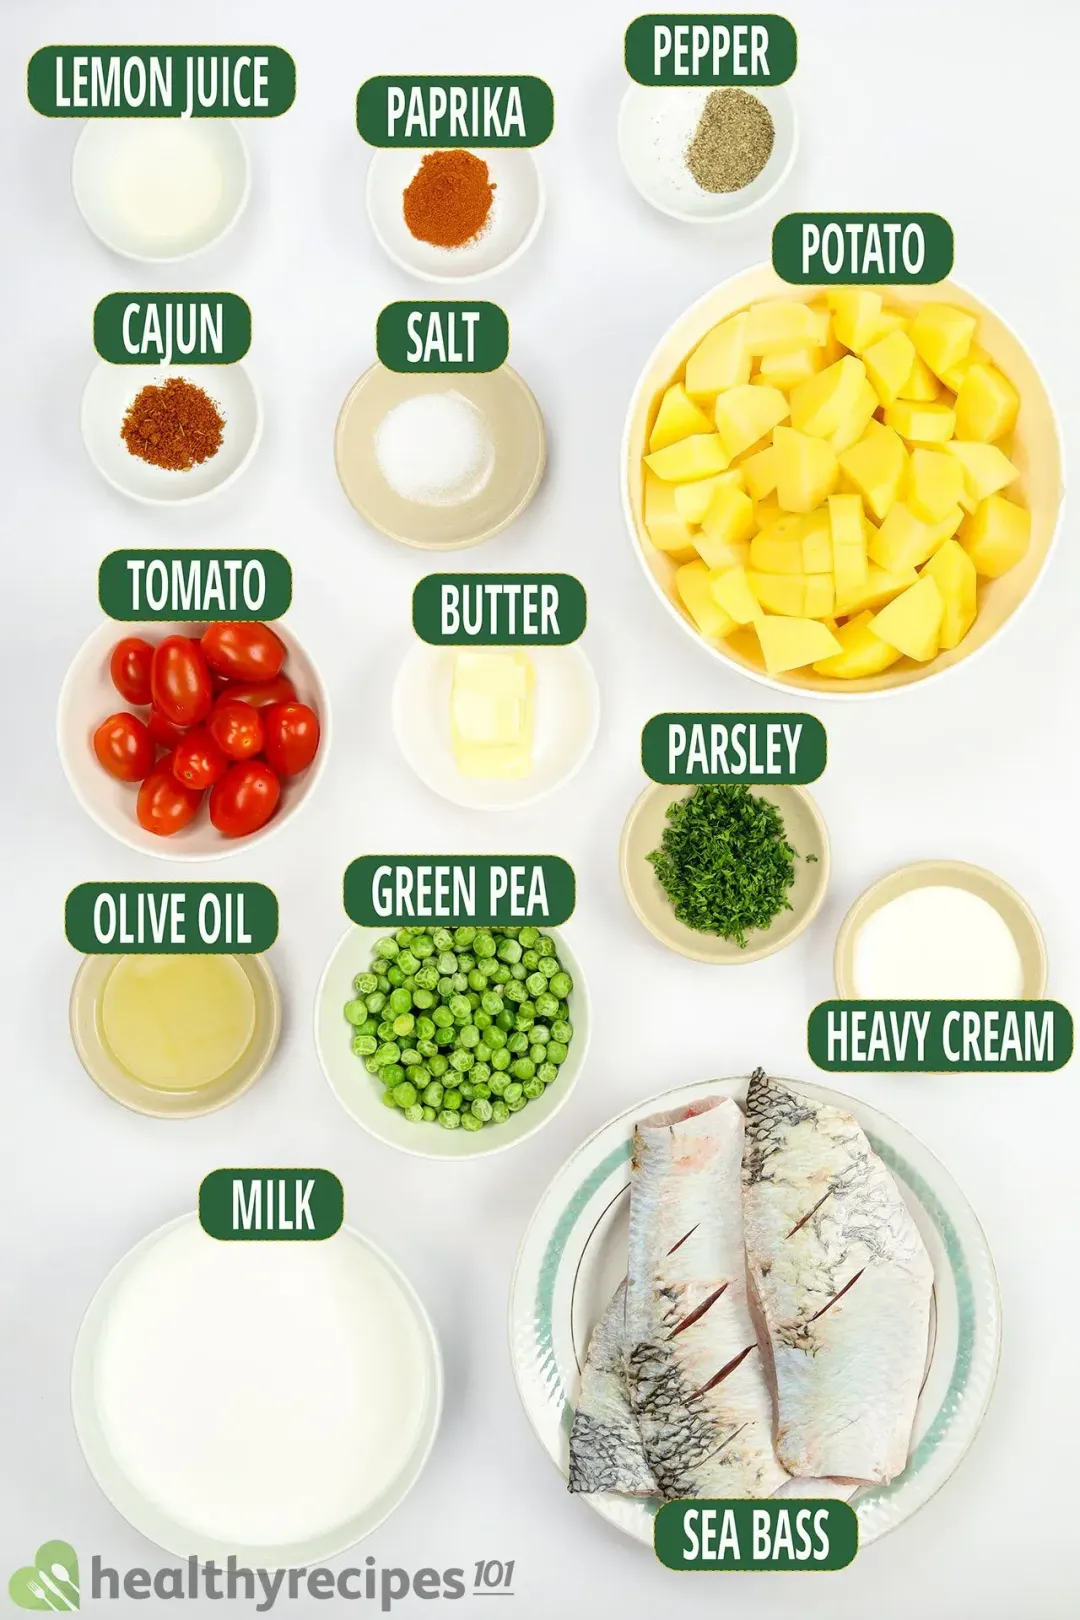 Ingredients for Pan Fried Sea Bass